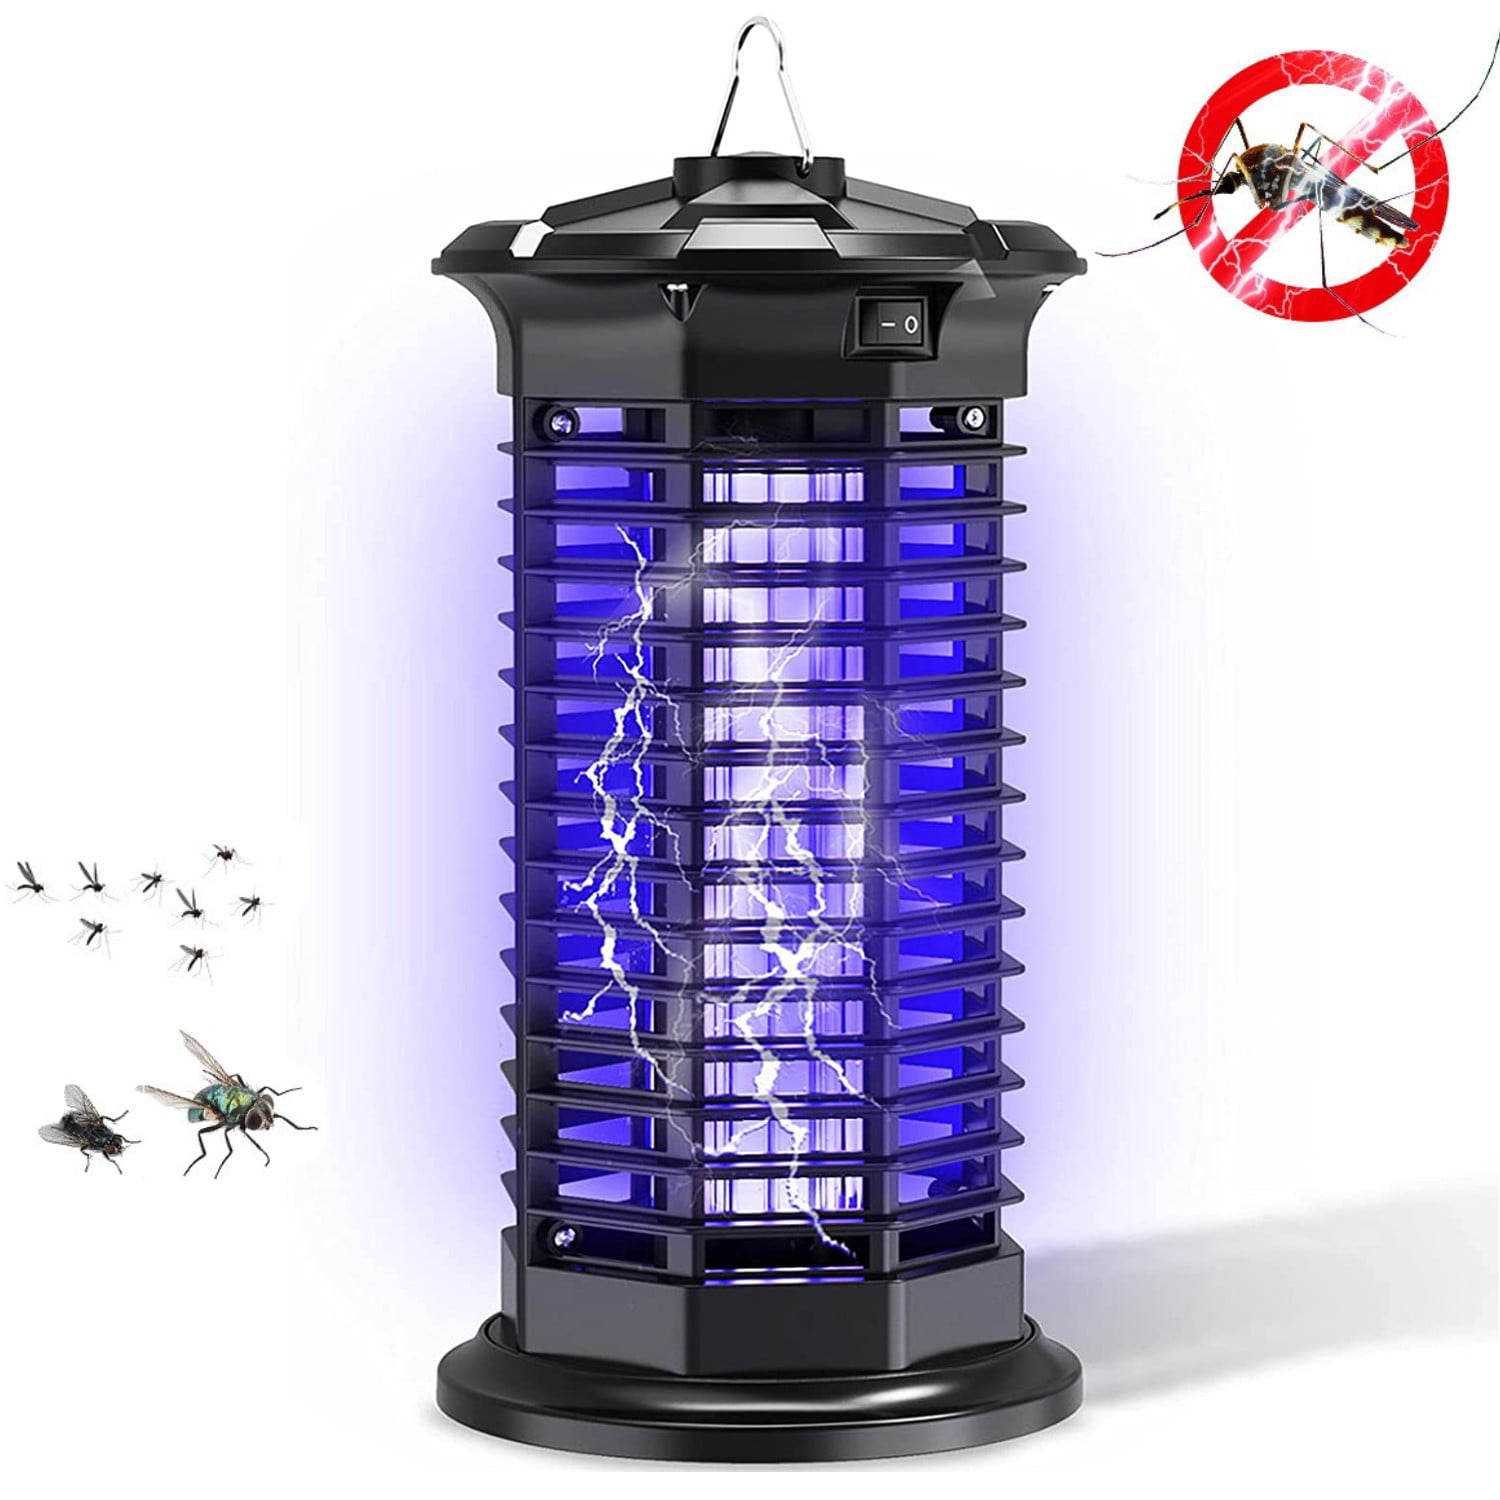 Details about   Mosquito Killer Lamp Bug Zapper Electronic Insect Killer Indoor Most Flying Pest 